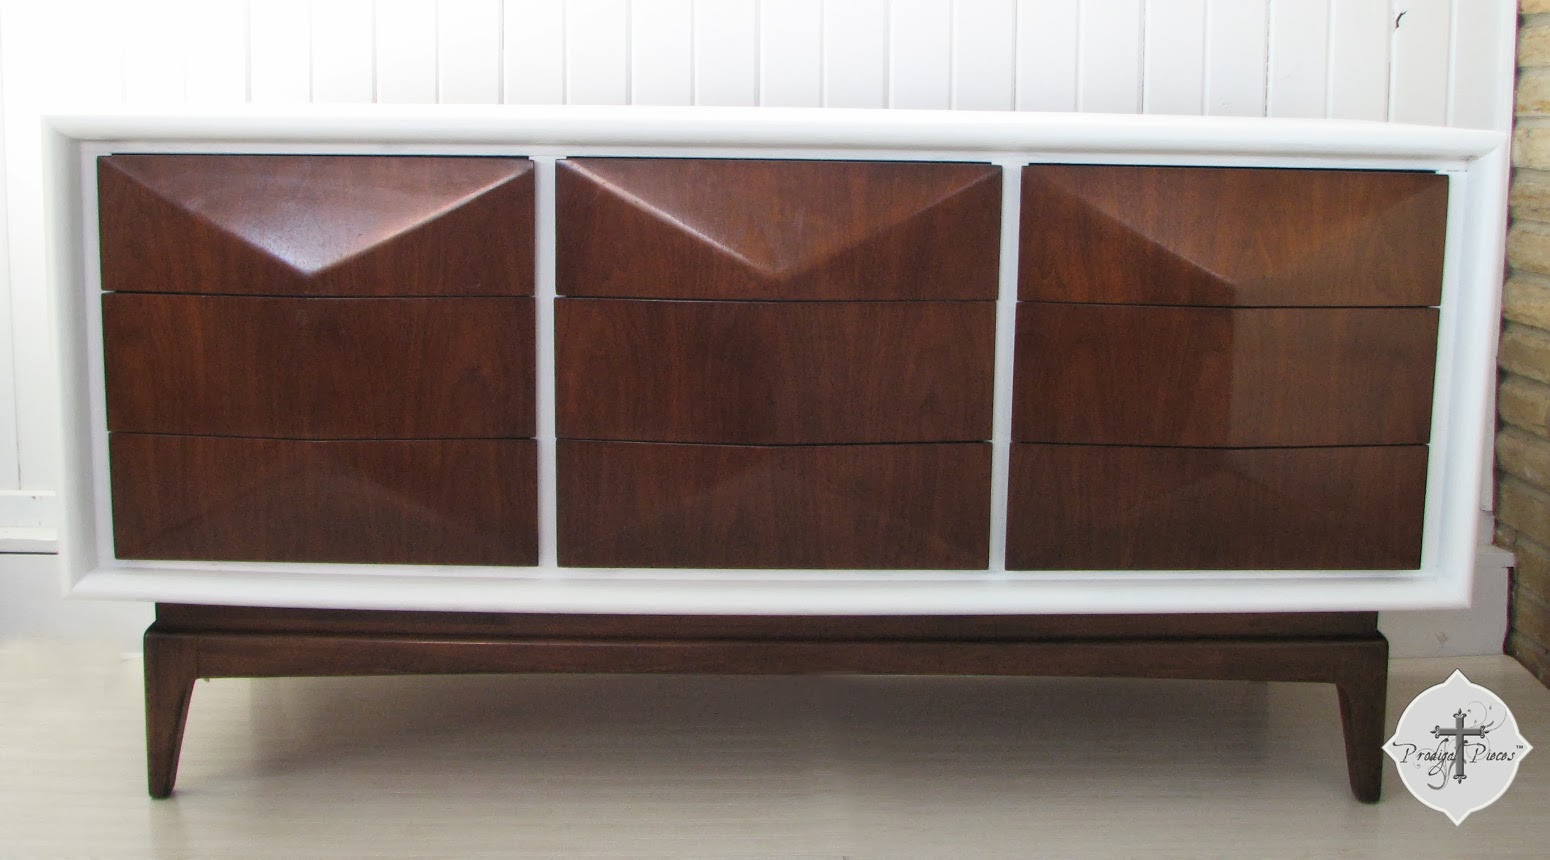 Vintage Mid-Century Modern Console Dresser by Prodigal Pieces